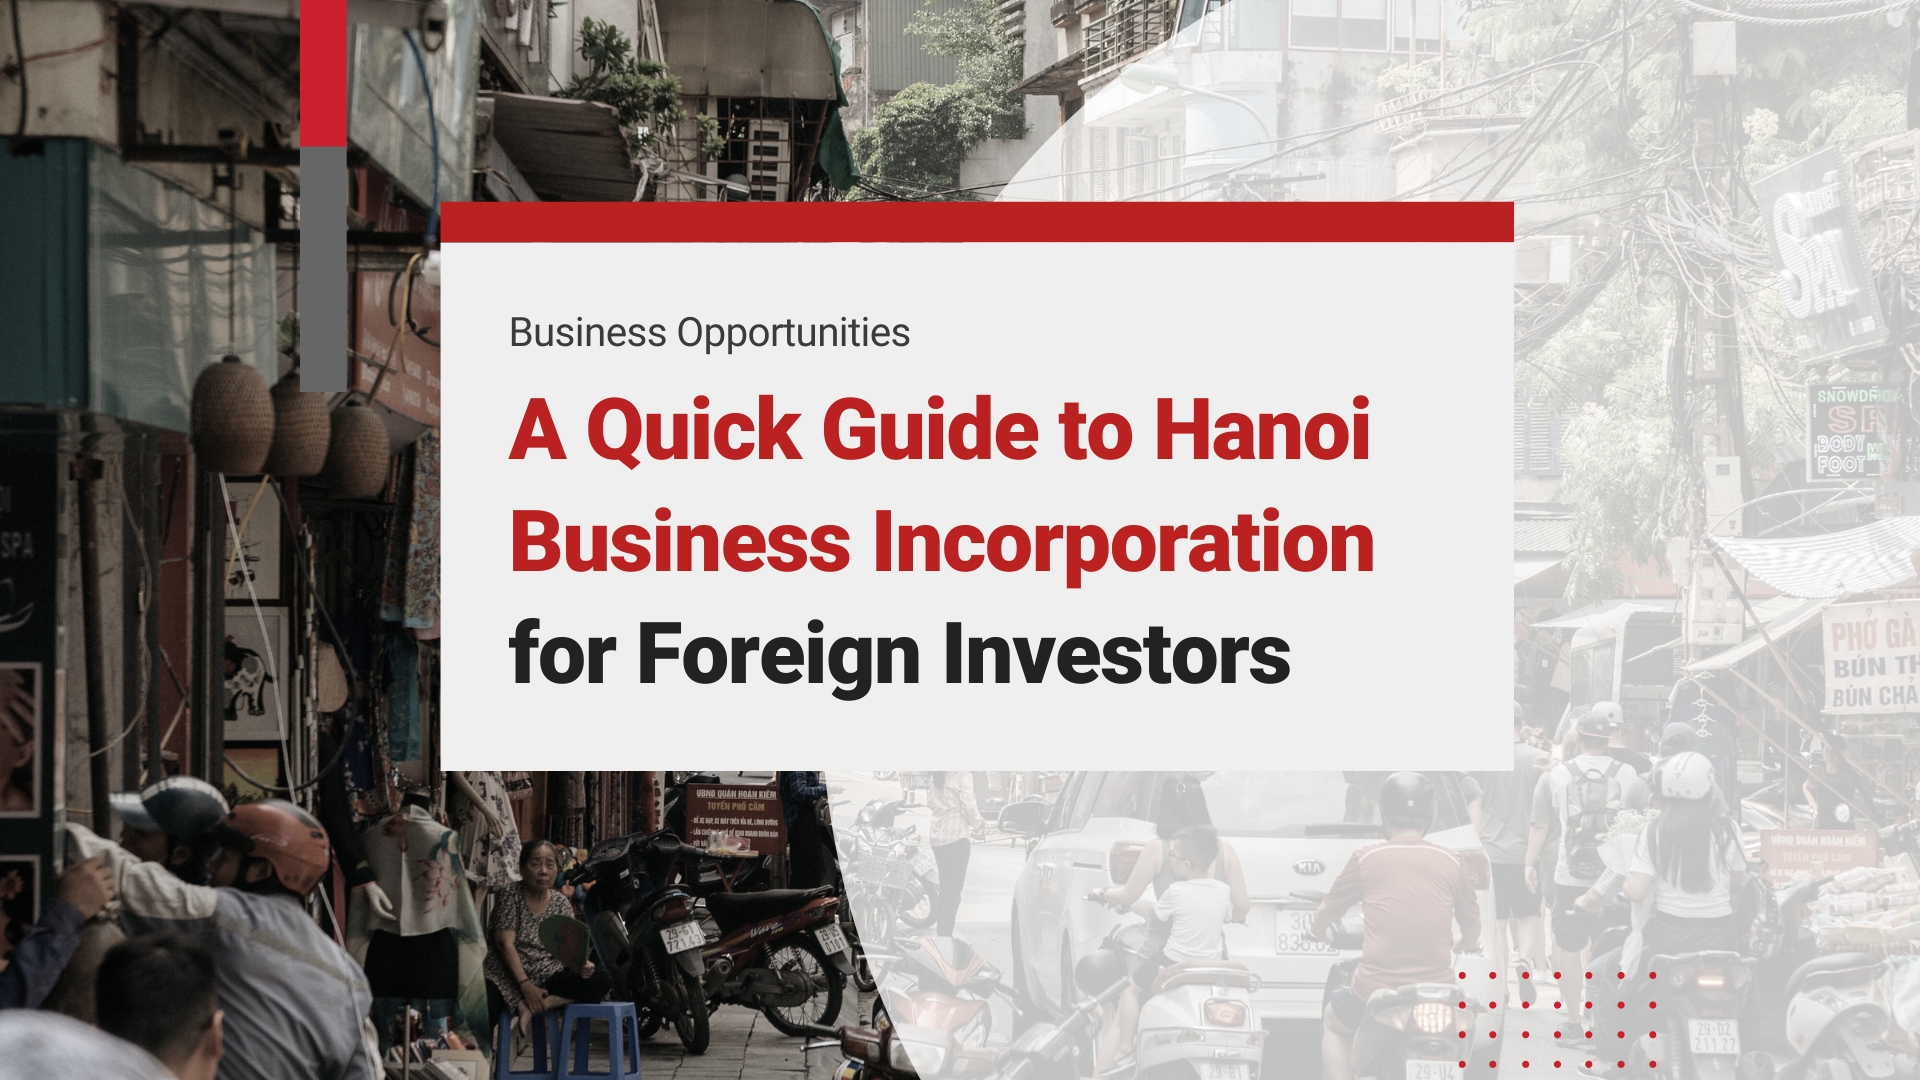 A Quick Guide to Hanoi Business Incorporation for Foreign Investors